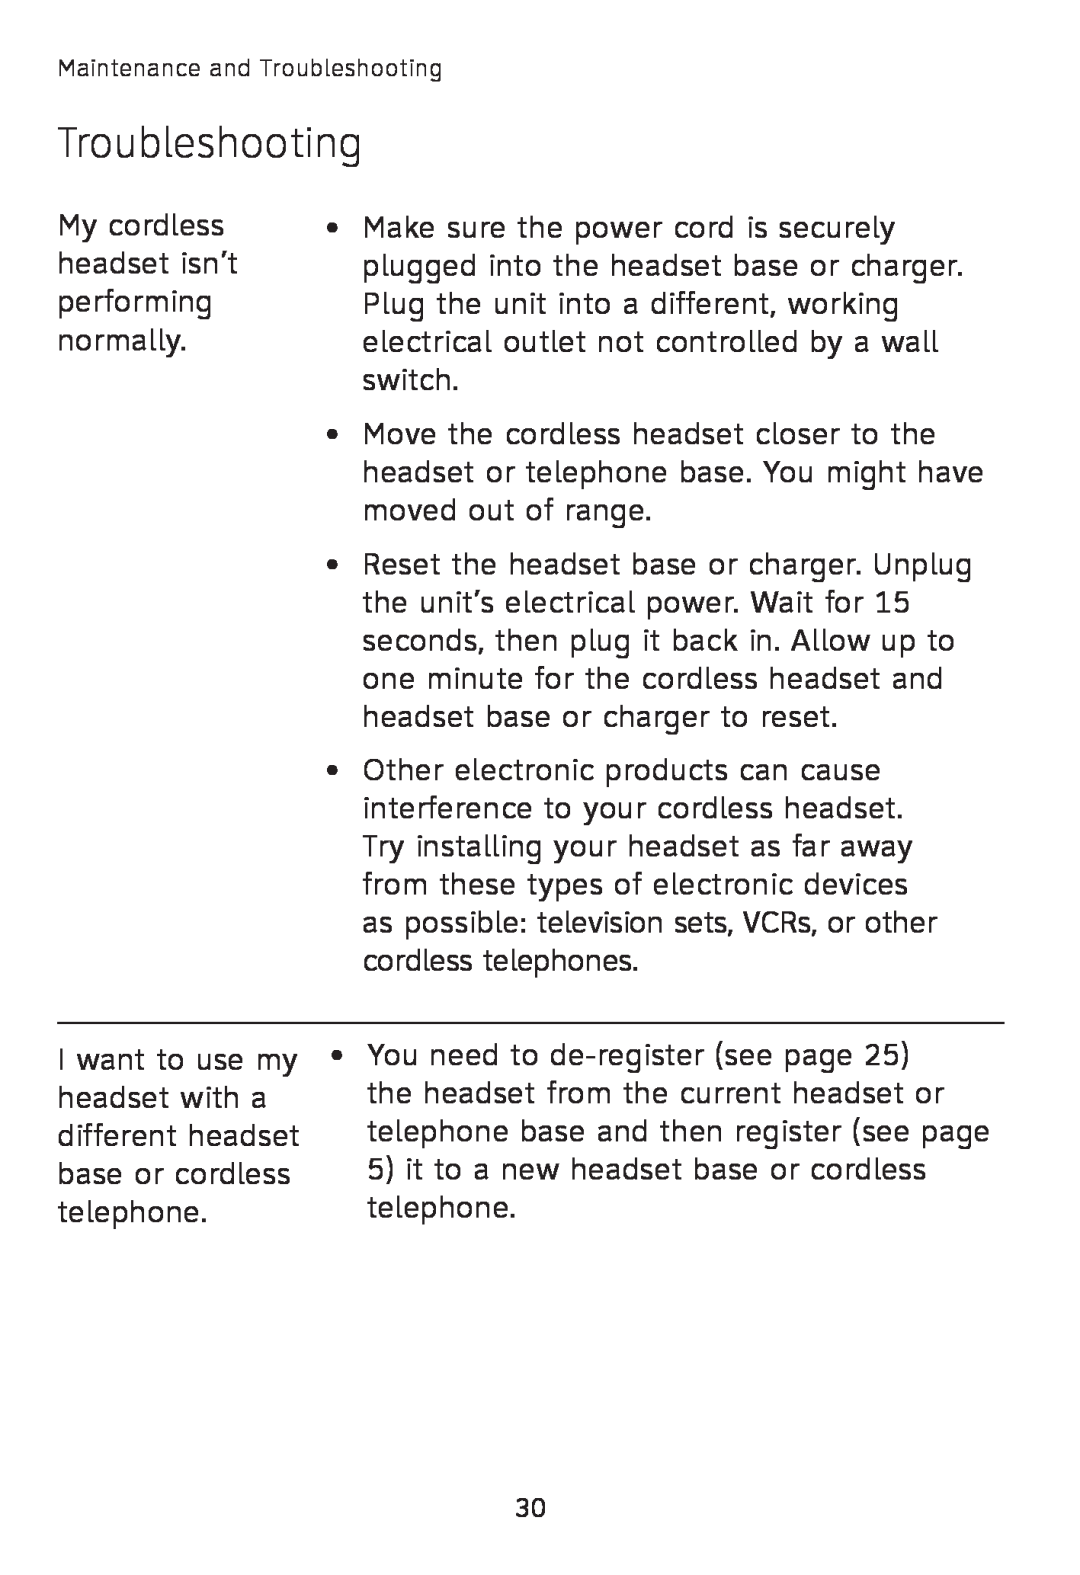 AT&T TL7600 user manual Troubleshooting, My cordless headset isn’t performing normally 